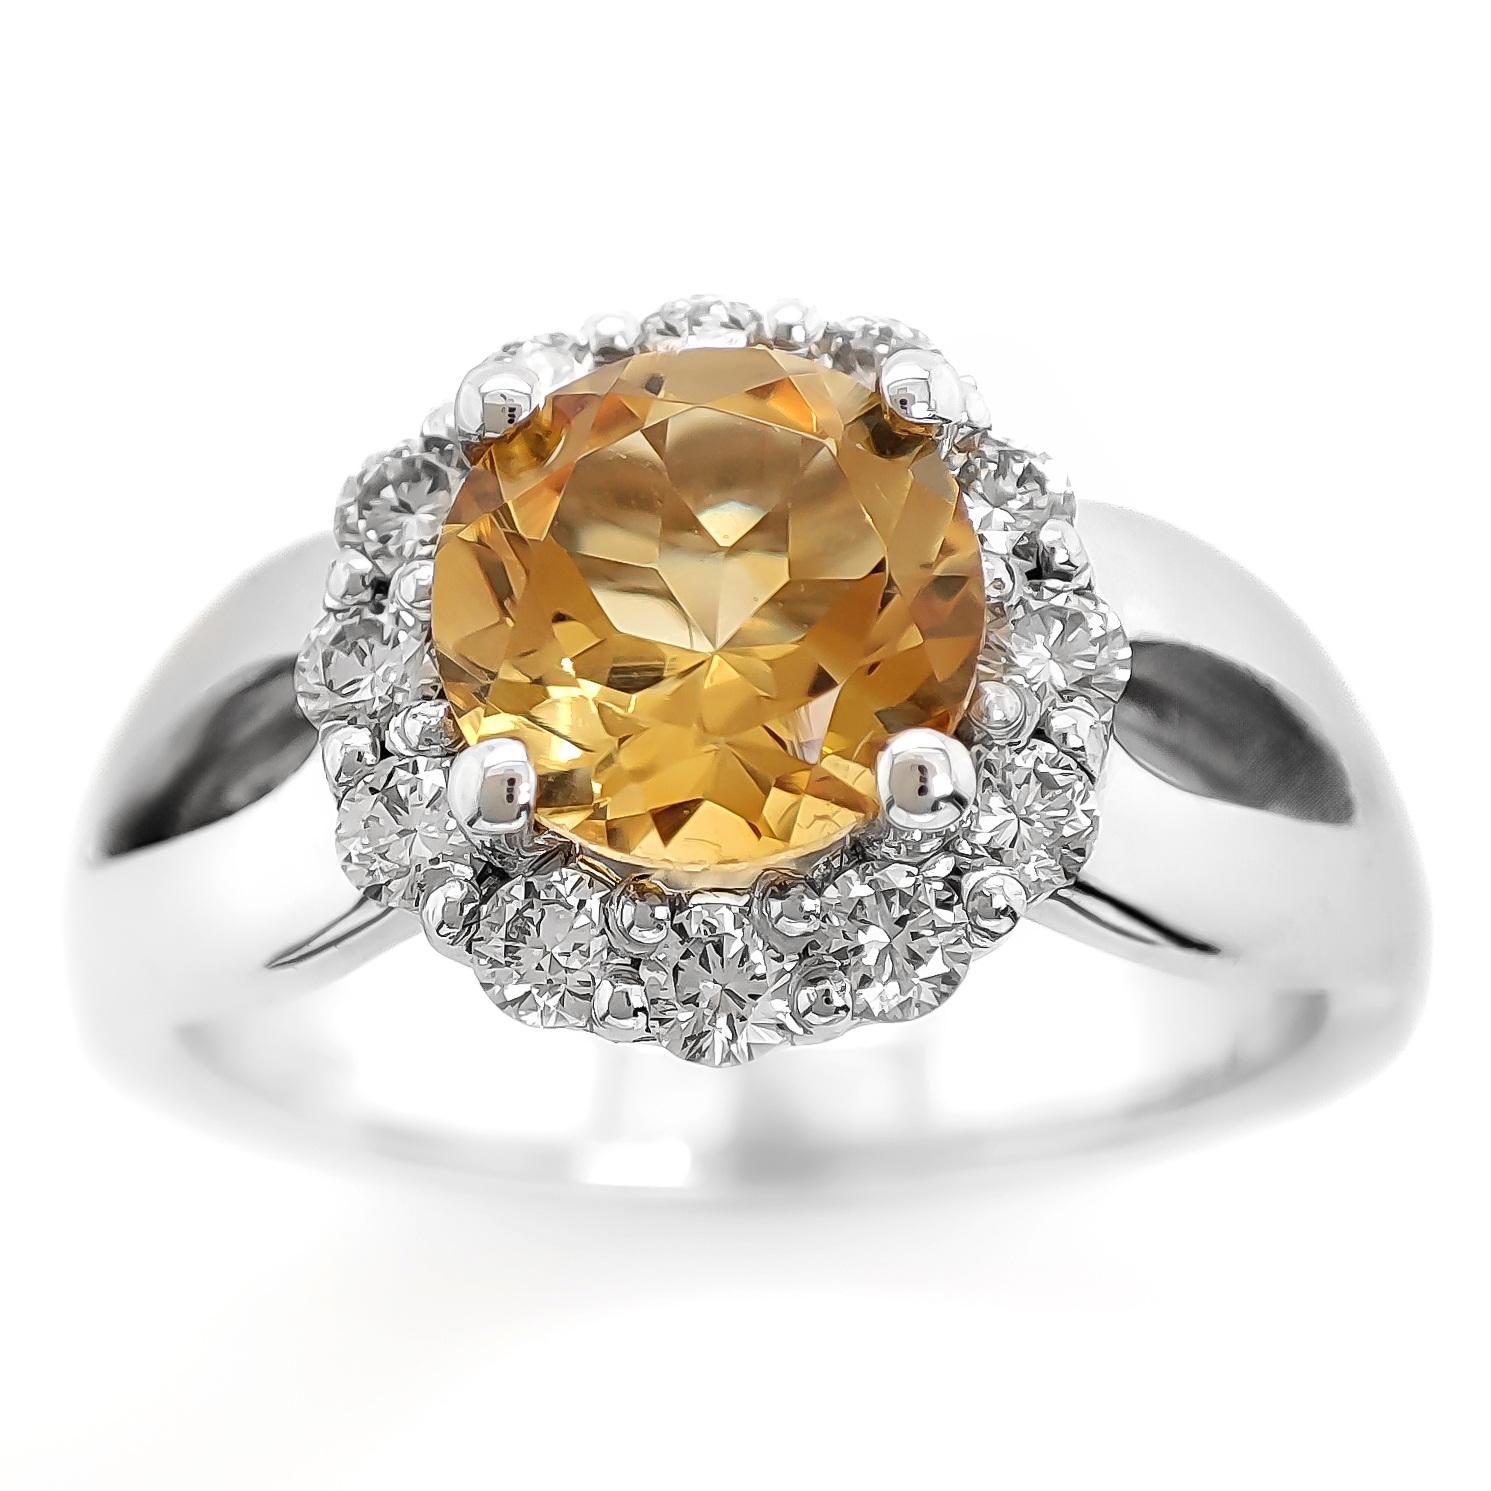 FOR US CUSTOMER NO VAT!

This captivating ring features a 1.18 carat natural quartz in a mesmerizing yellowish-orange . The quartz is the star of the show, showcasing its unique and vibrant color.

Complementing the quartz are 12 white diamonds,